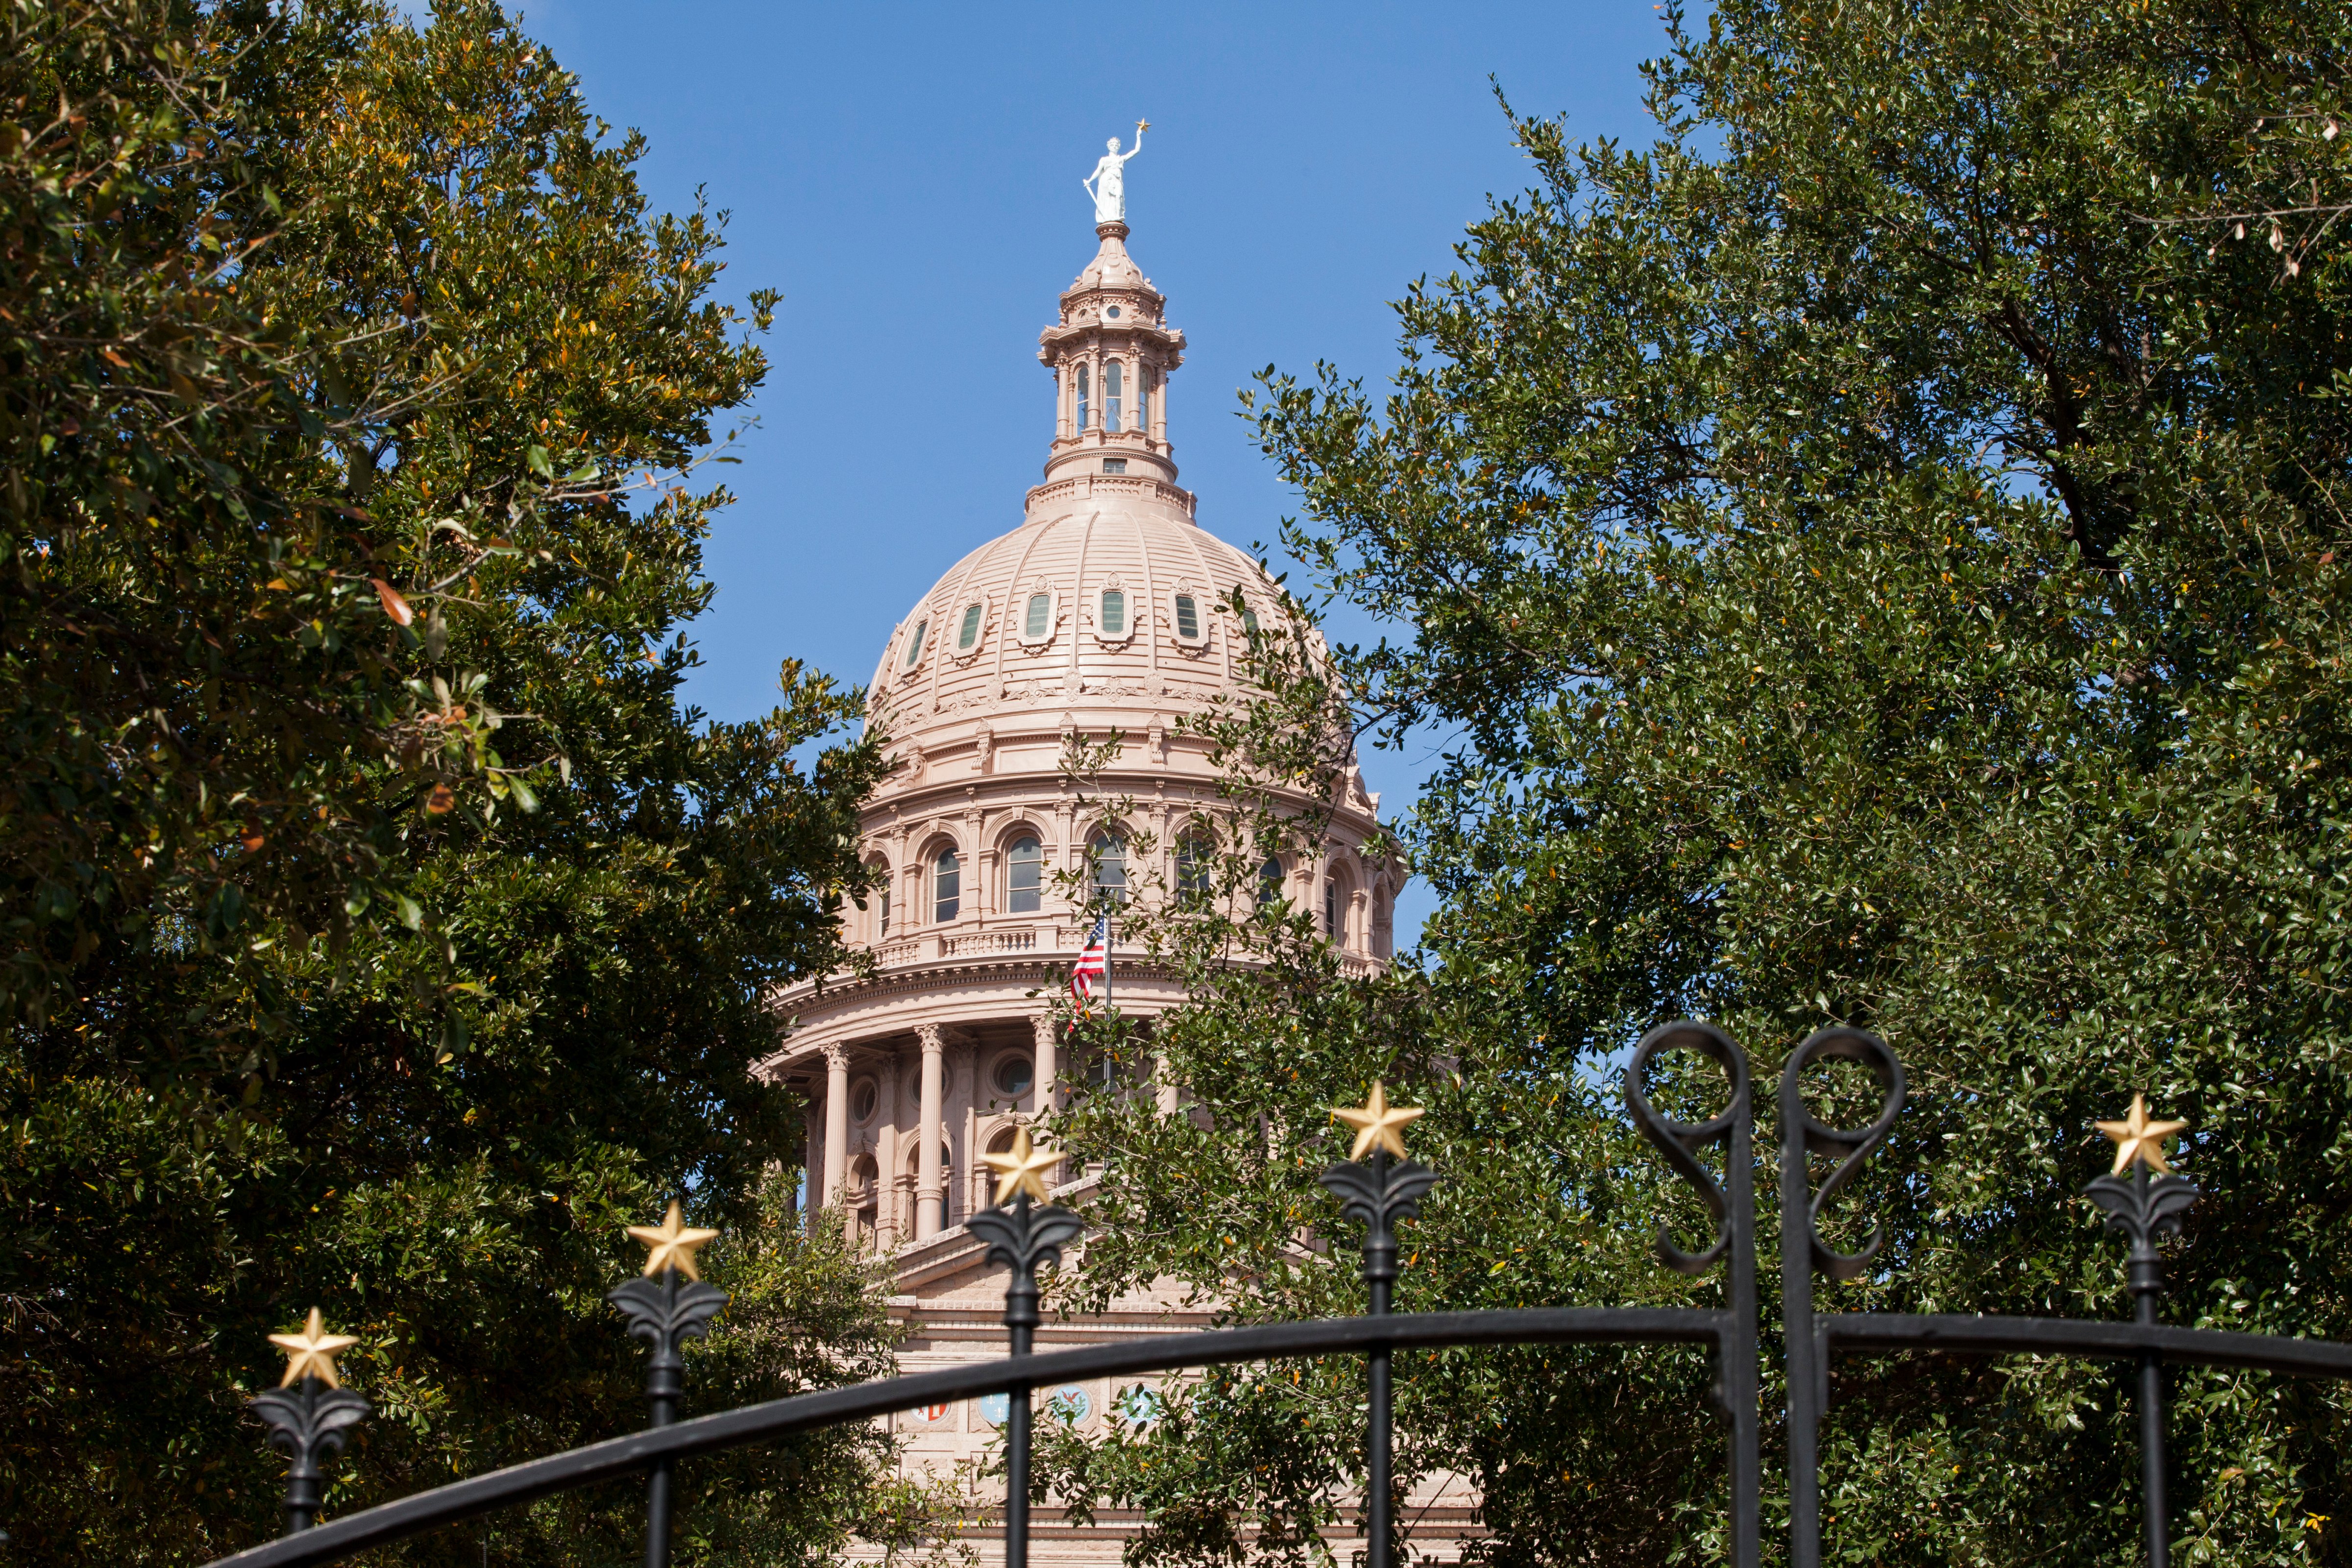 The Texas State Capitol in Austin, on Feb. 22, 2016. (Melanie Stetson Freeman—Christian Science Monitor/Getty Images)